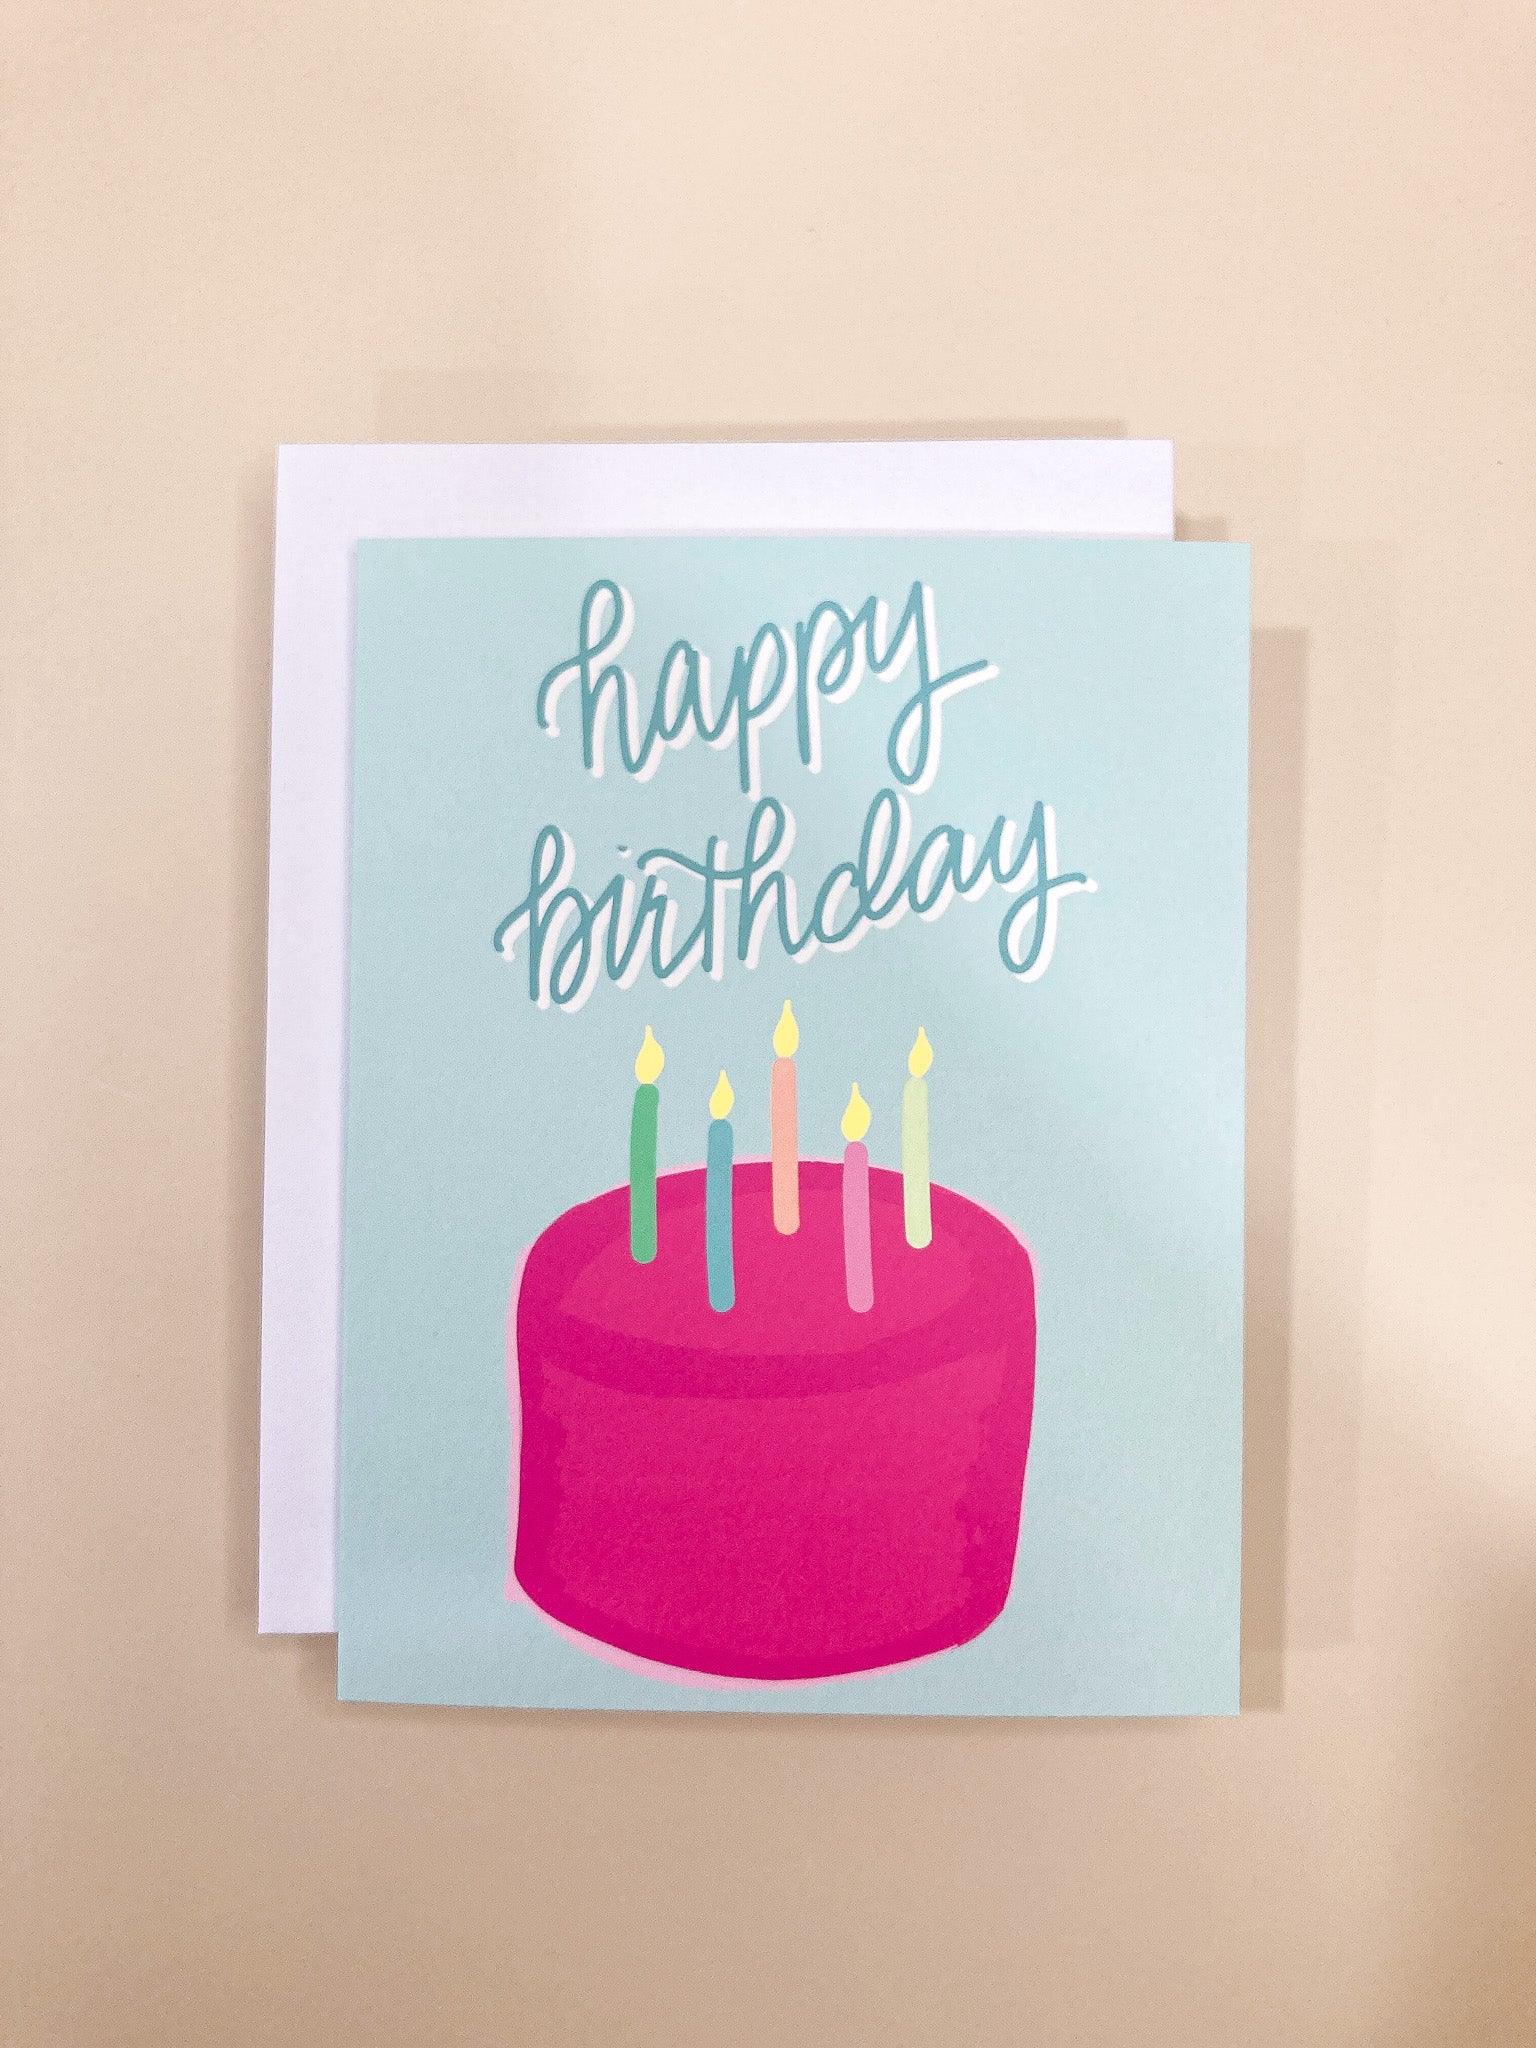 Birthday Card. Each card measures 4.25" in height by 5.5" in width, featuring a blank interior for your personal message